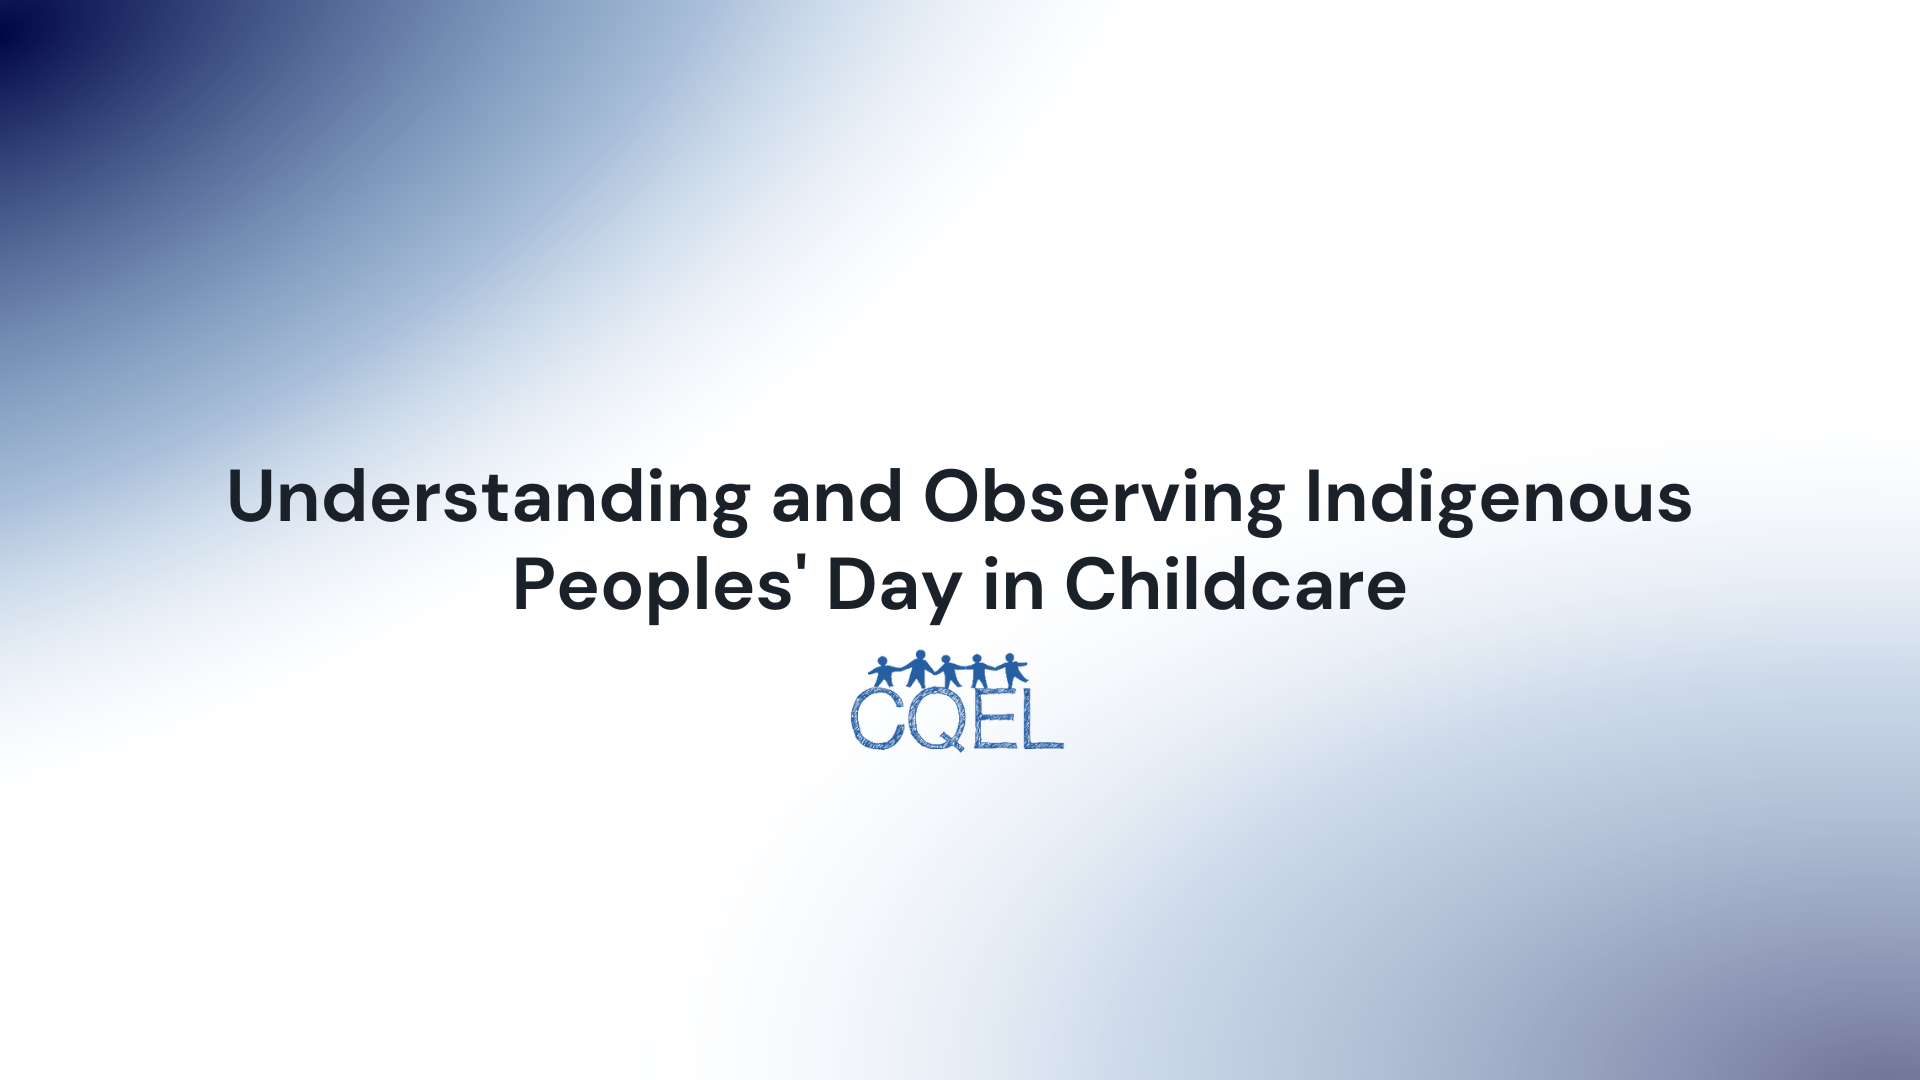 Understanding and Observing Indigenous Peoples' Day in Childcare